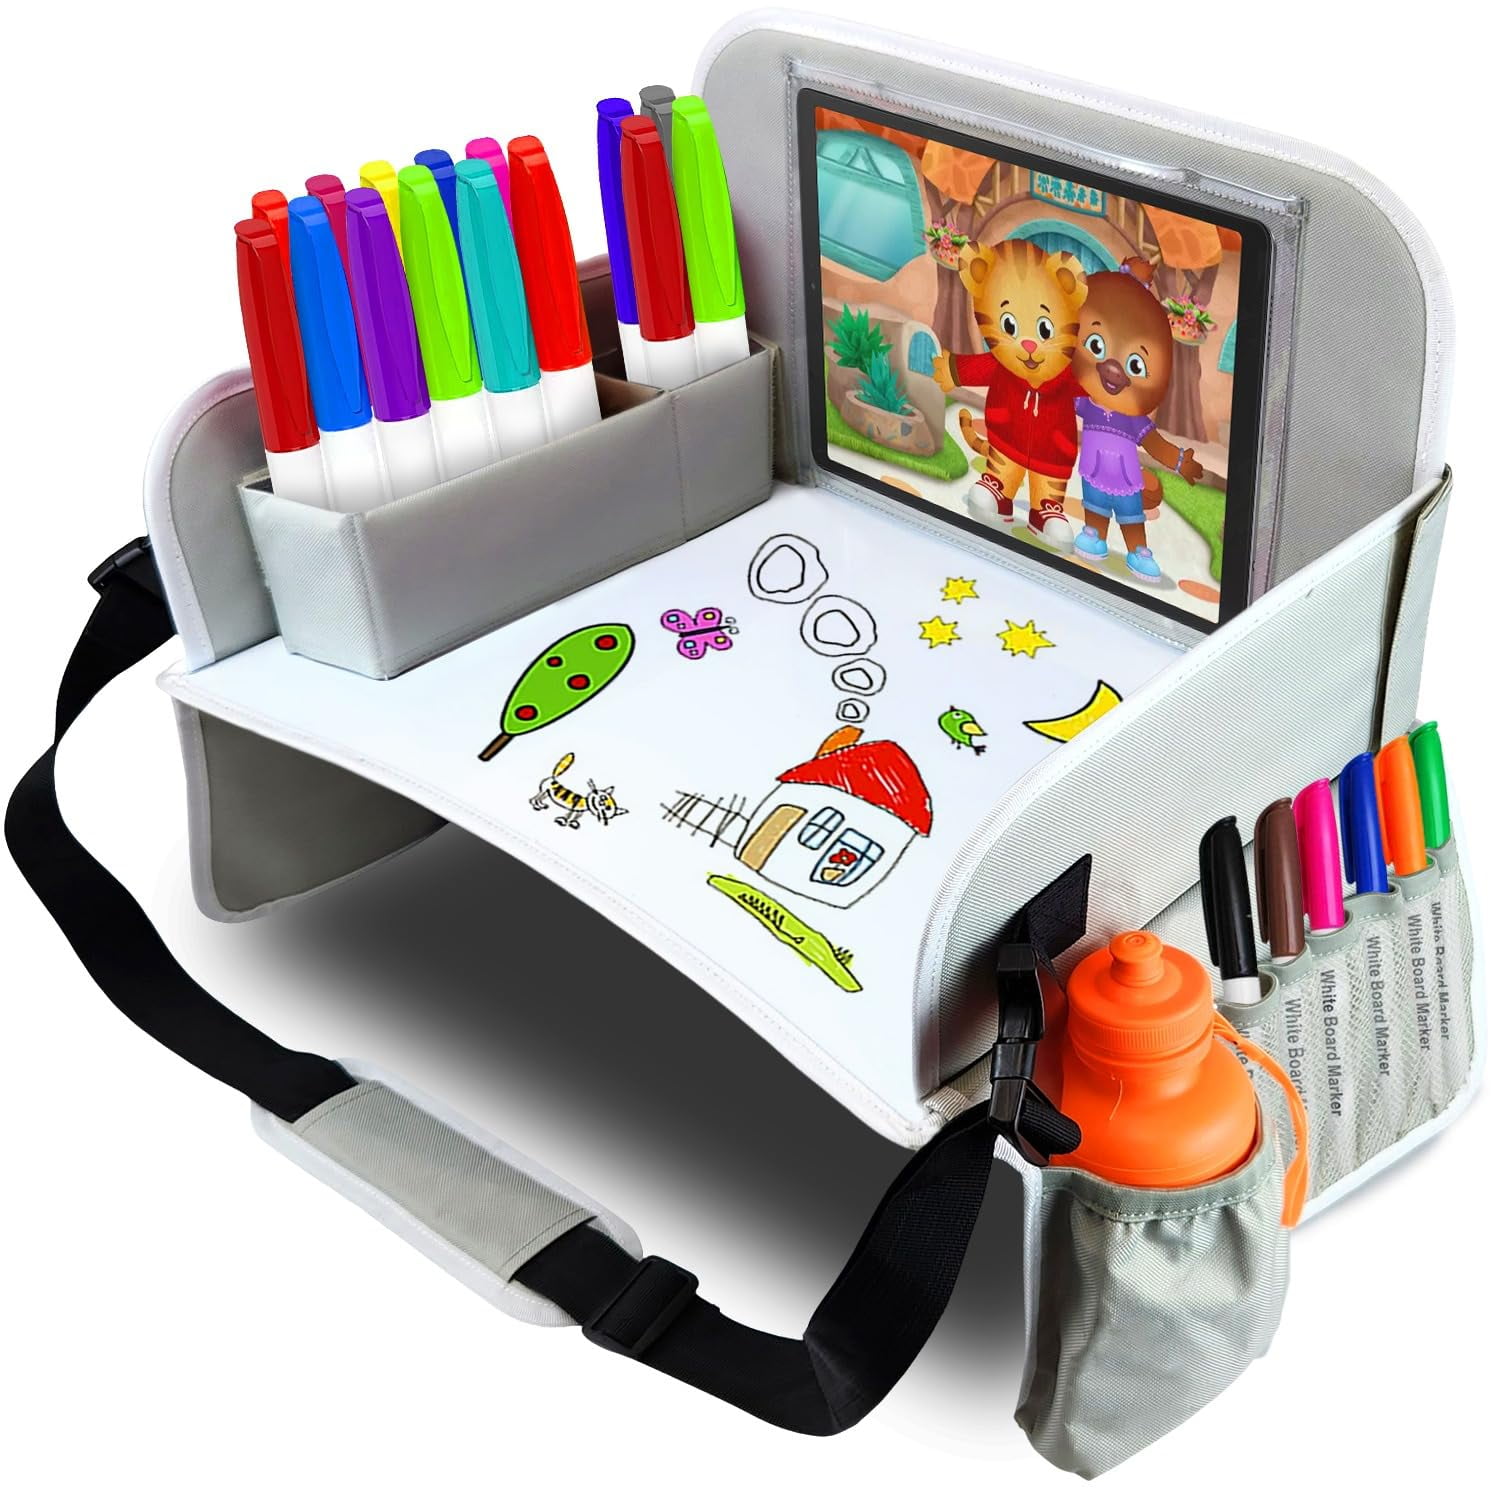 Lusso Gear Kids Travel Tray with Dry Erase Board, Road Trip Essentials  Kids, No-Drop Tablet Holder, Lap Desk, Cup Holder, Toddler Toy Storage,  Fits